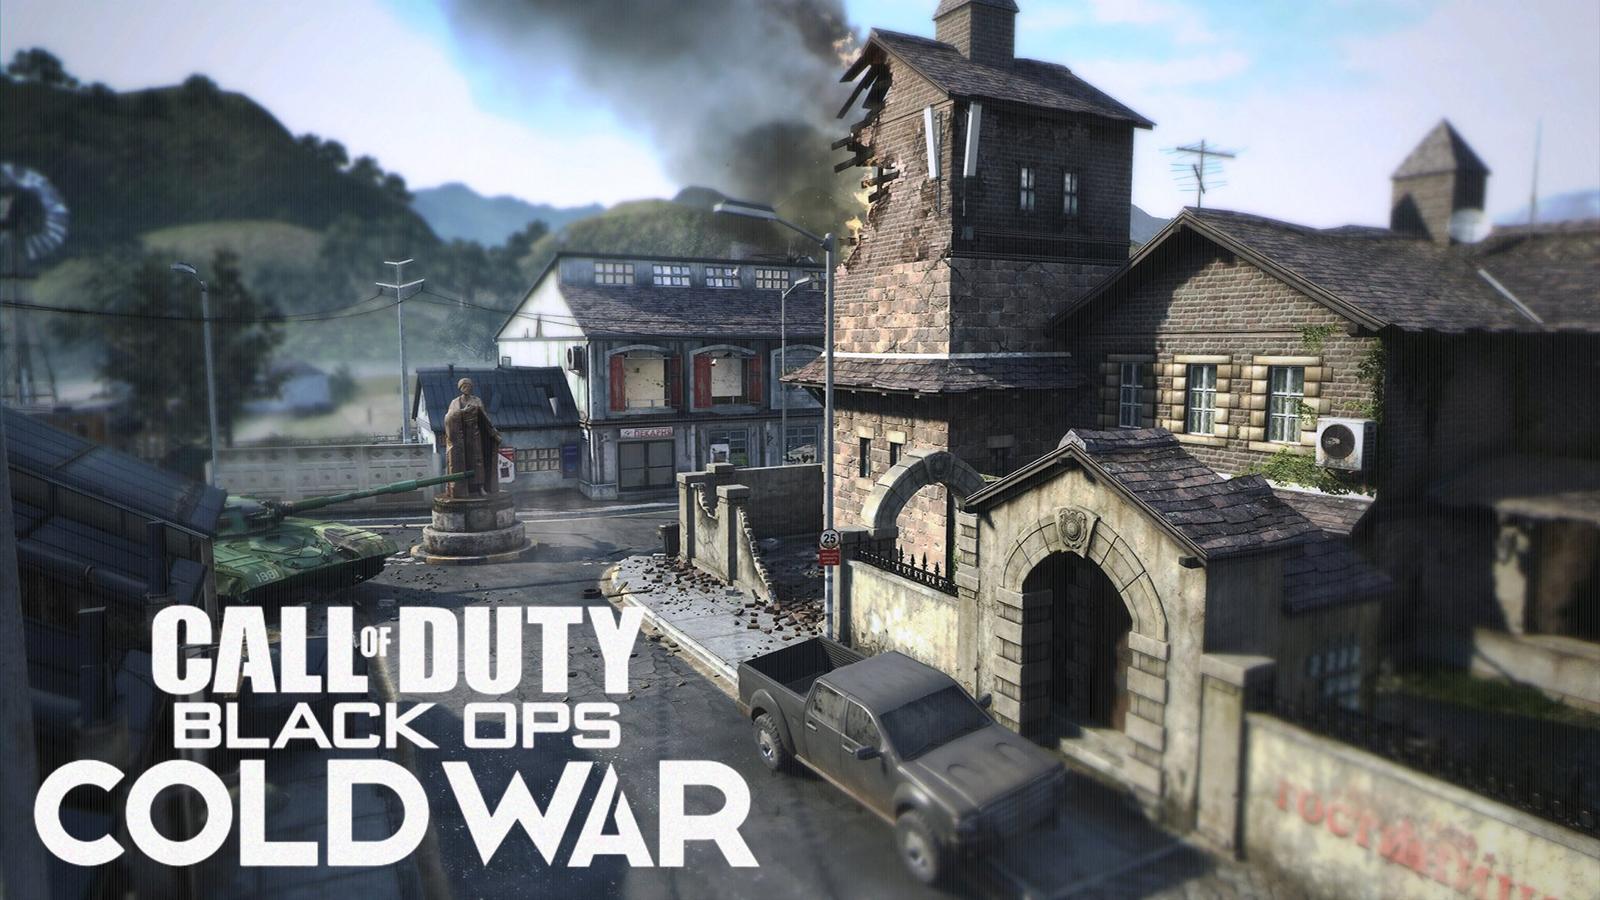 Every Black Ops 2 Map Will Be Remastered For A Future…